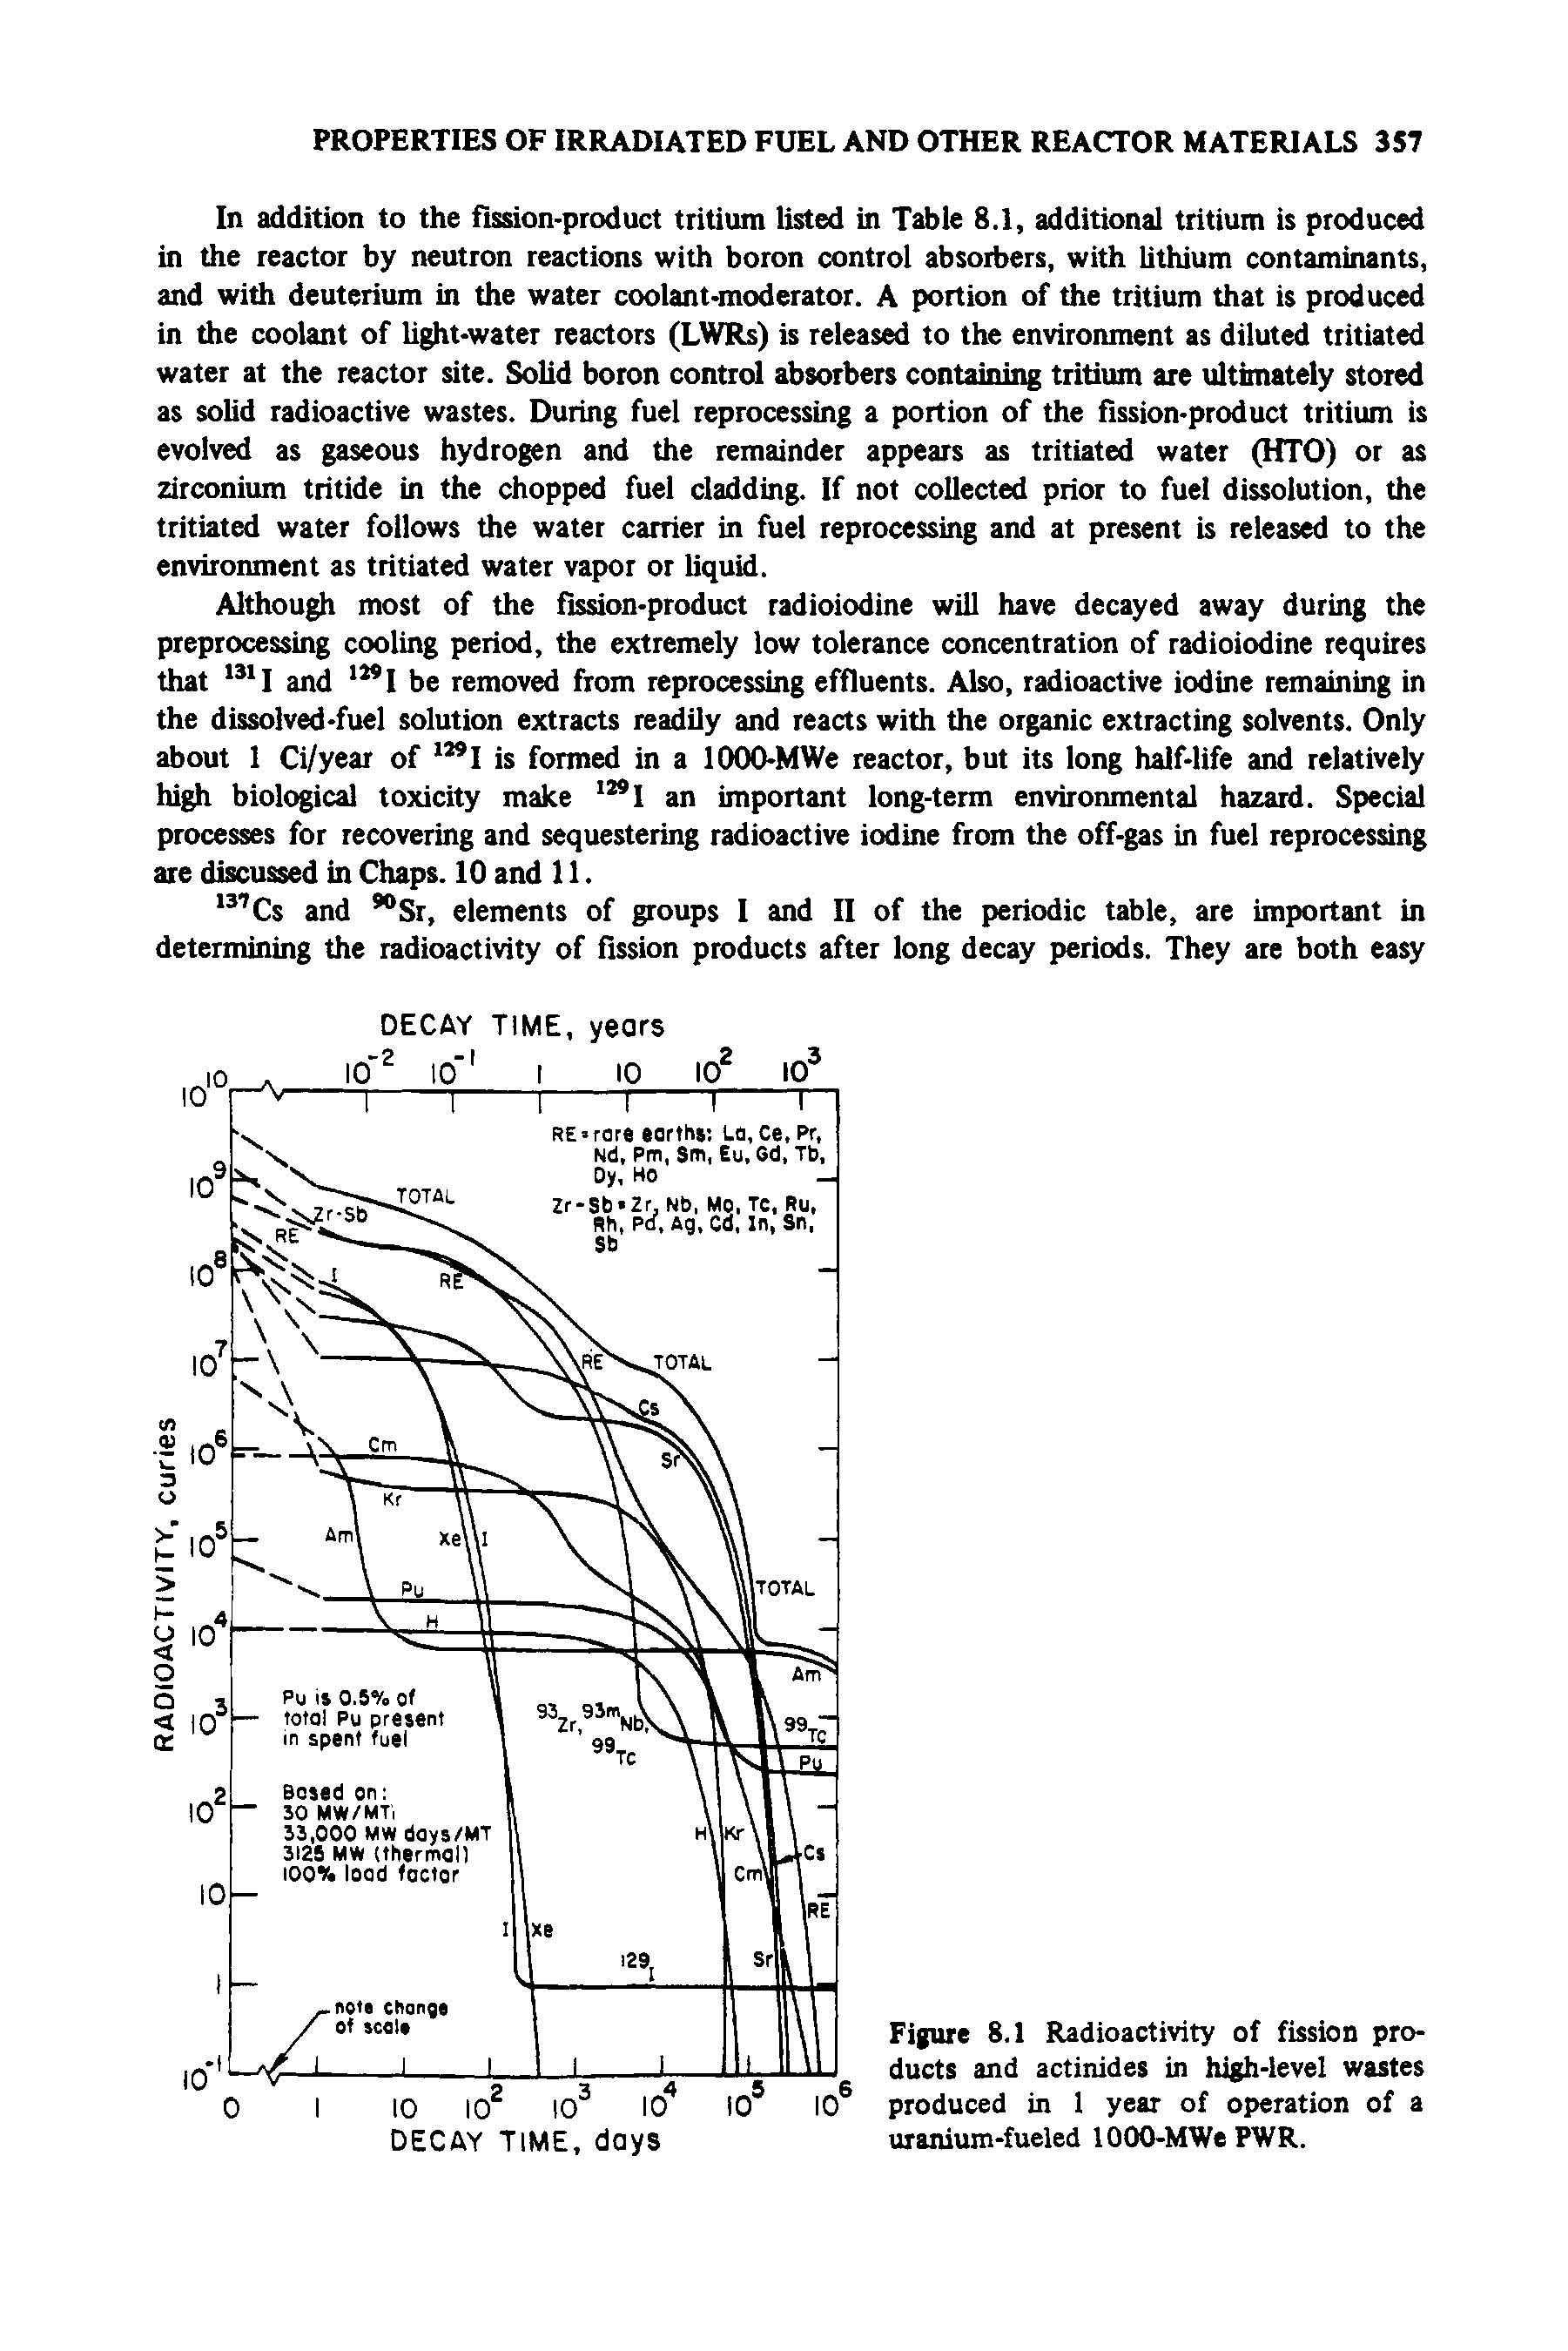 Figure 8.1 Radioactivity of fission products and actinides in high-level wastes produced in 1 year of operation of a uranium-fueled 1000-MWe PWR.